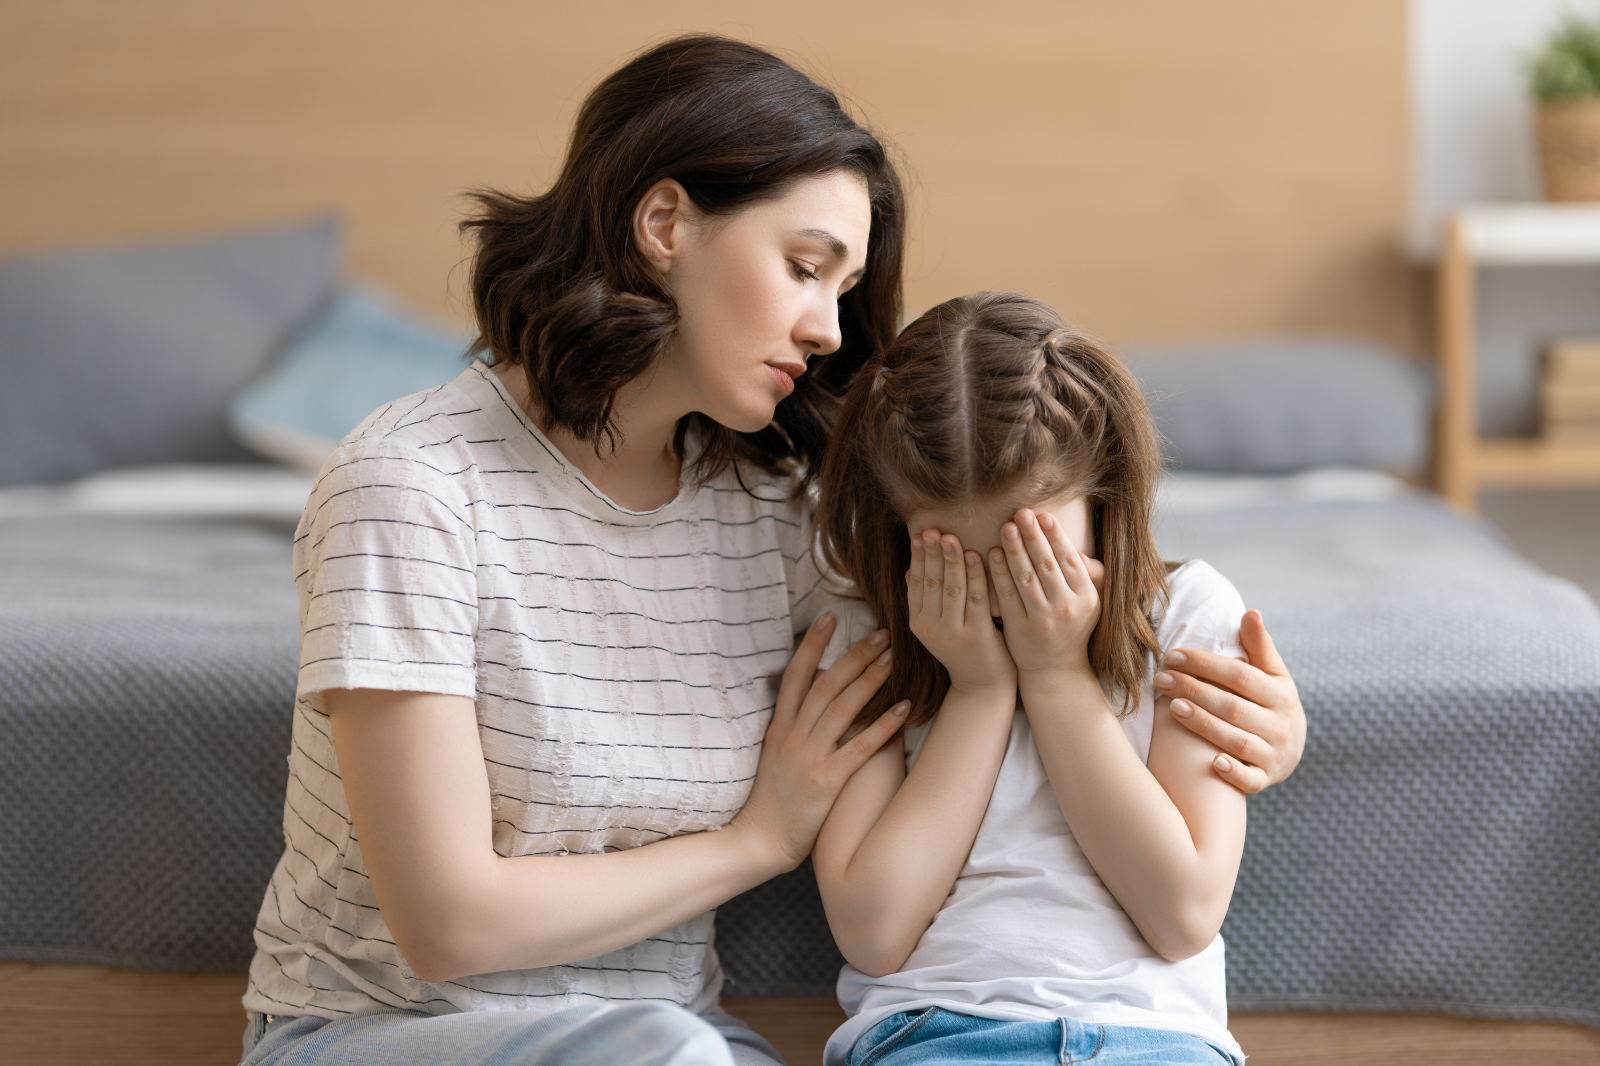 As a parent, choosing the right nanny to care for your child can be a challenging task. You want someone who will not only provide reliable and attentive care, but also foster your child’s development and growth. However, there’s another factor that you should consider when choosing a nanny: emotional intelligence.